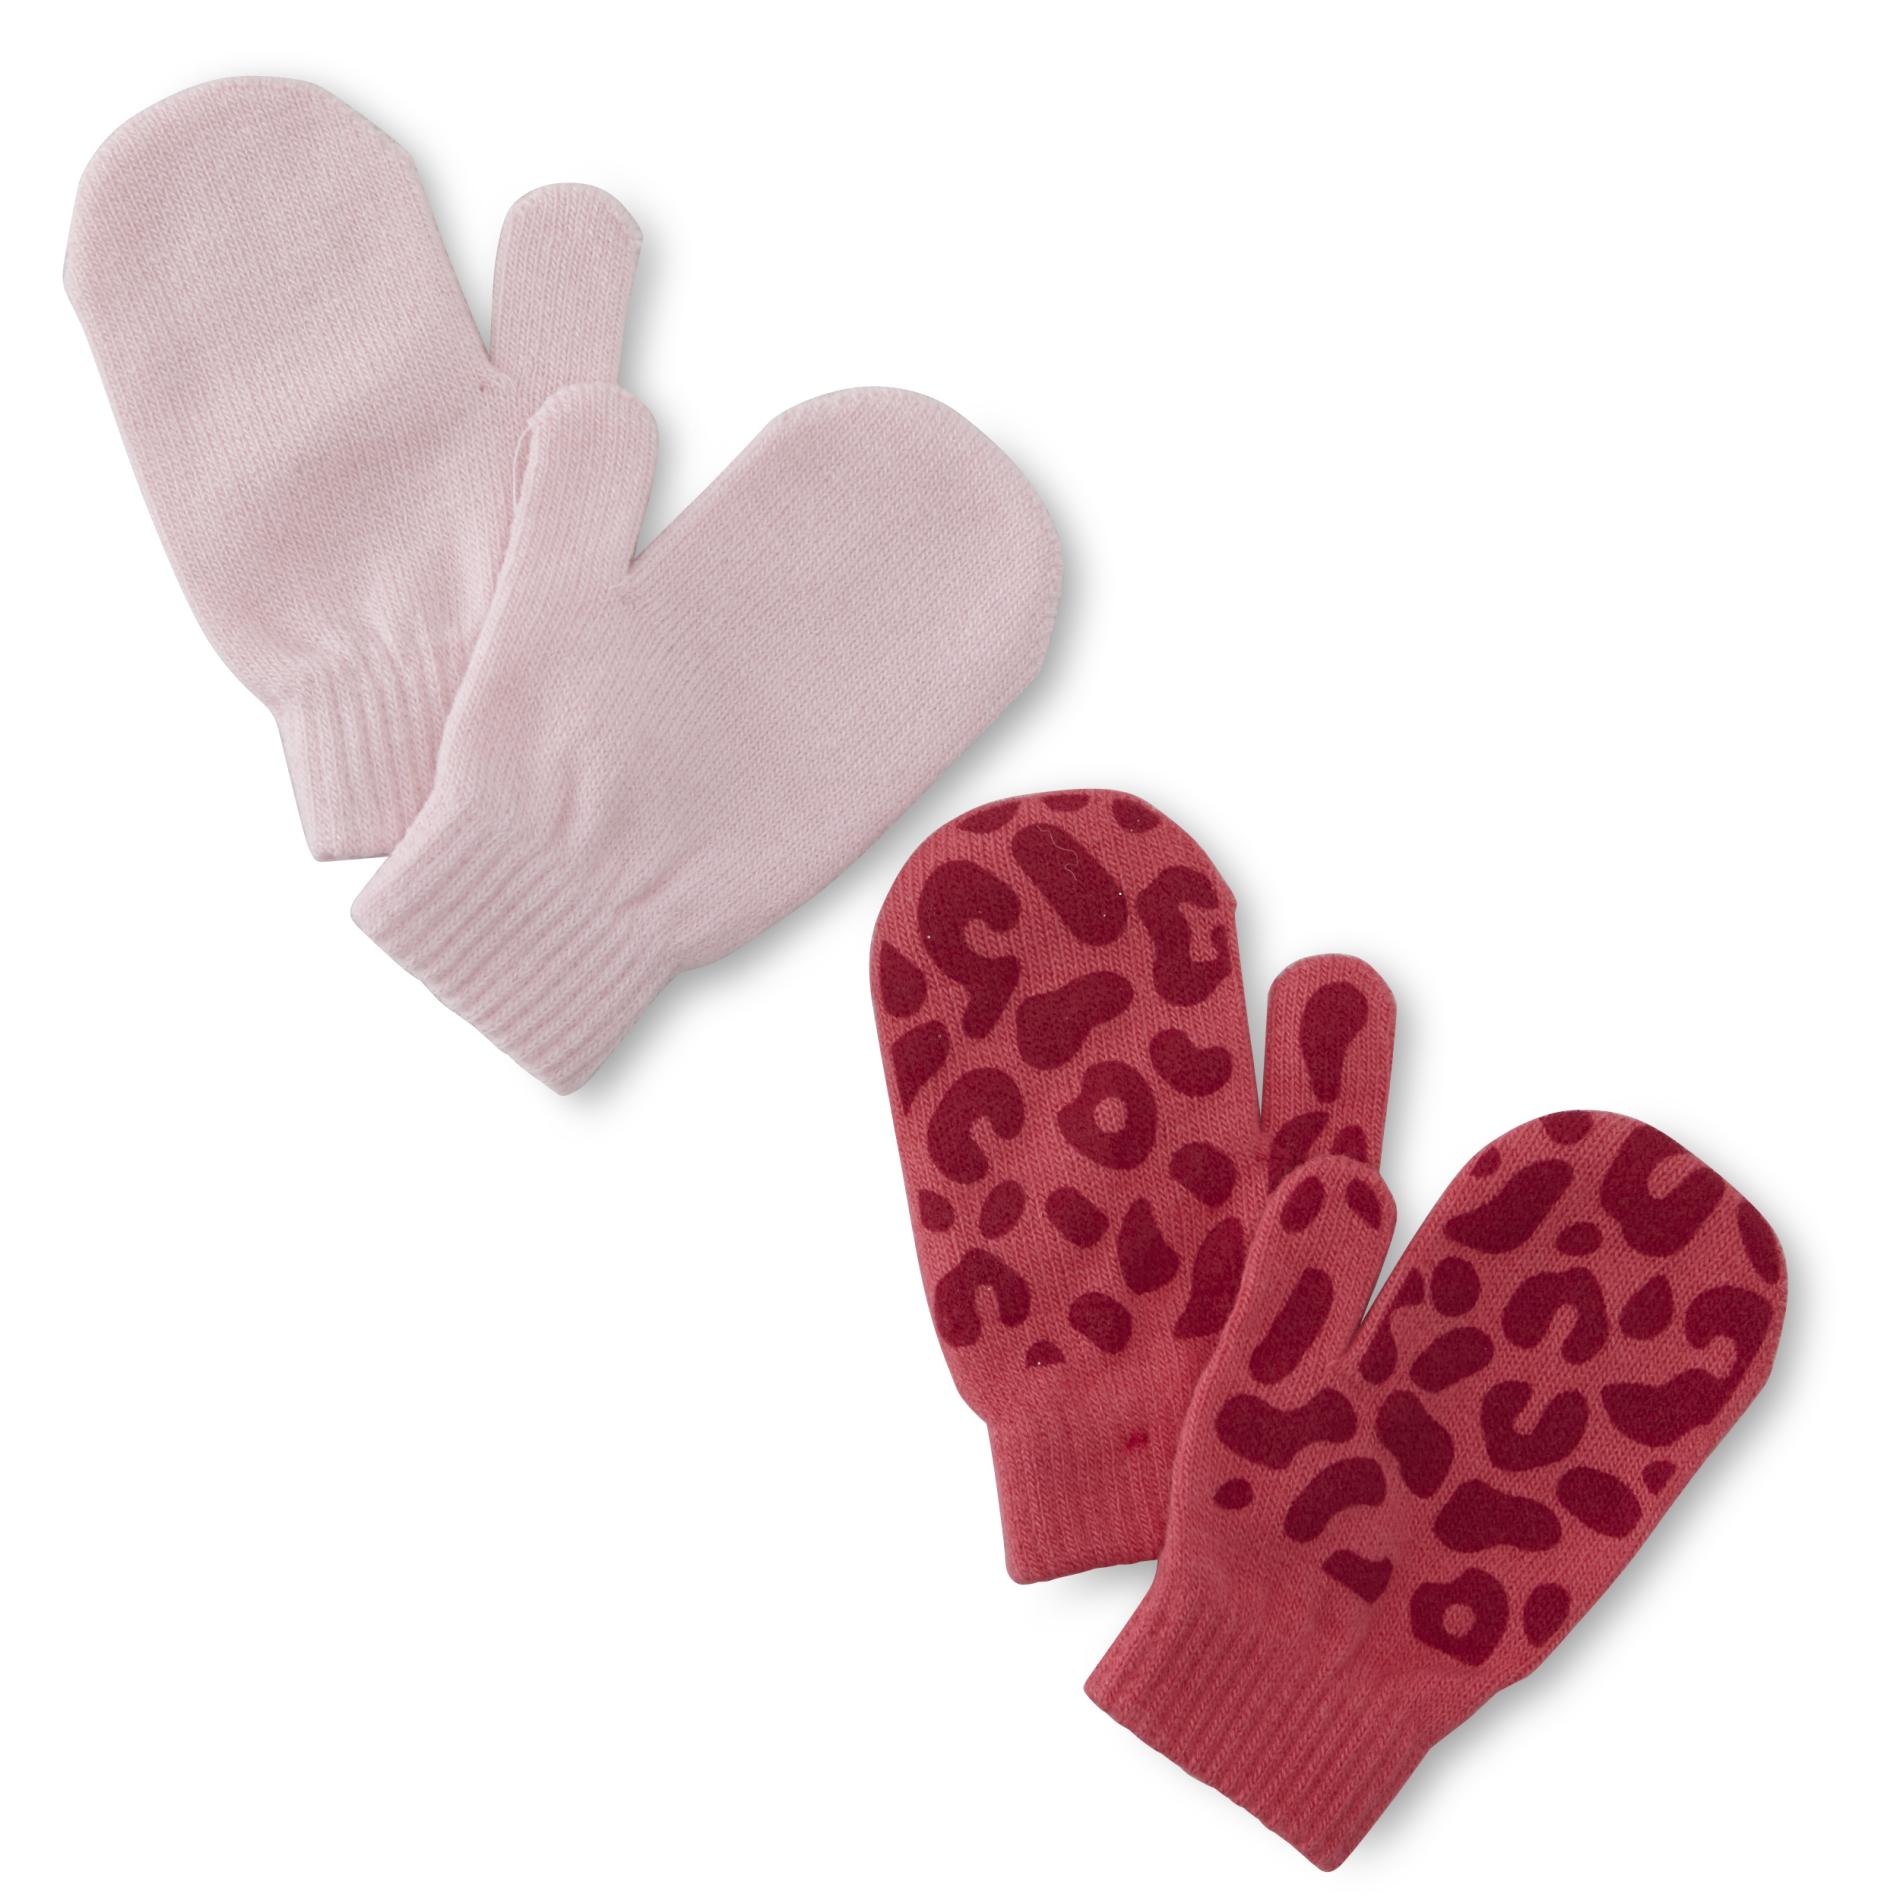 Simply Styled Toddler Girls' 2-Pairs Mittens - Solid & Leopard Print